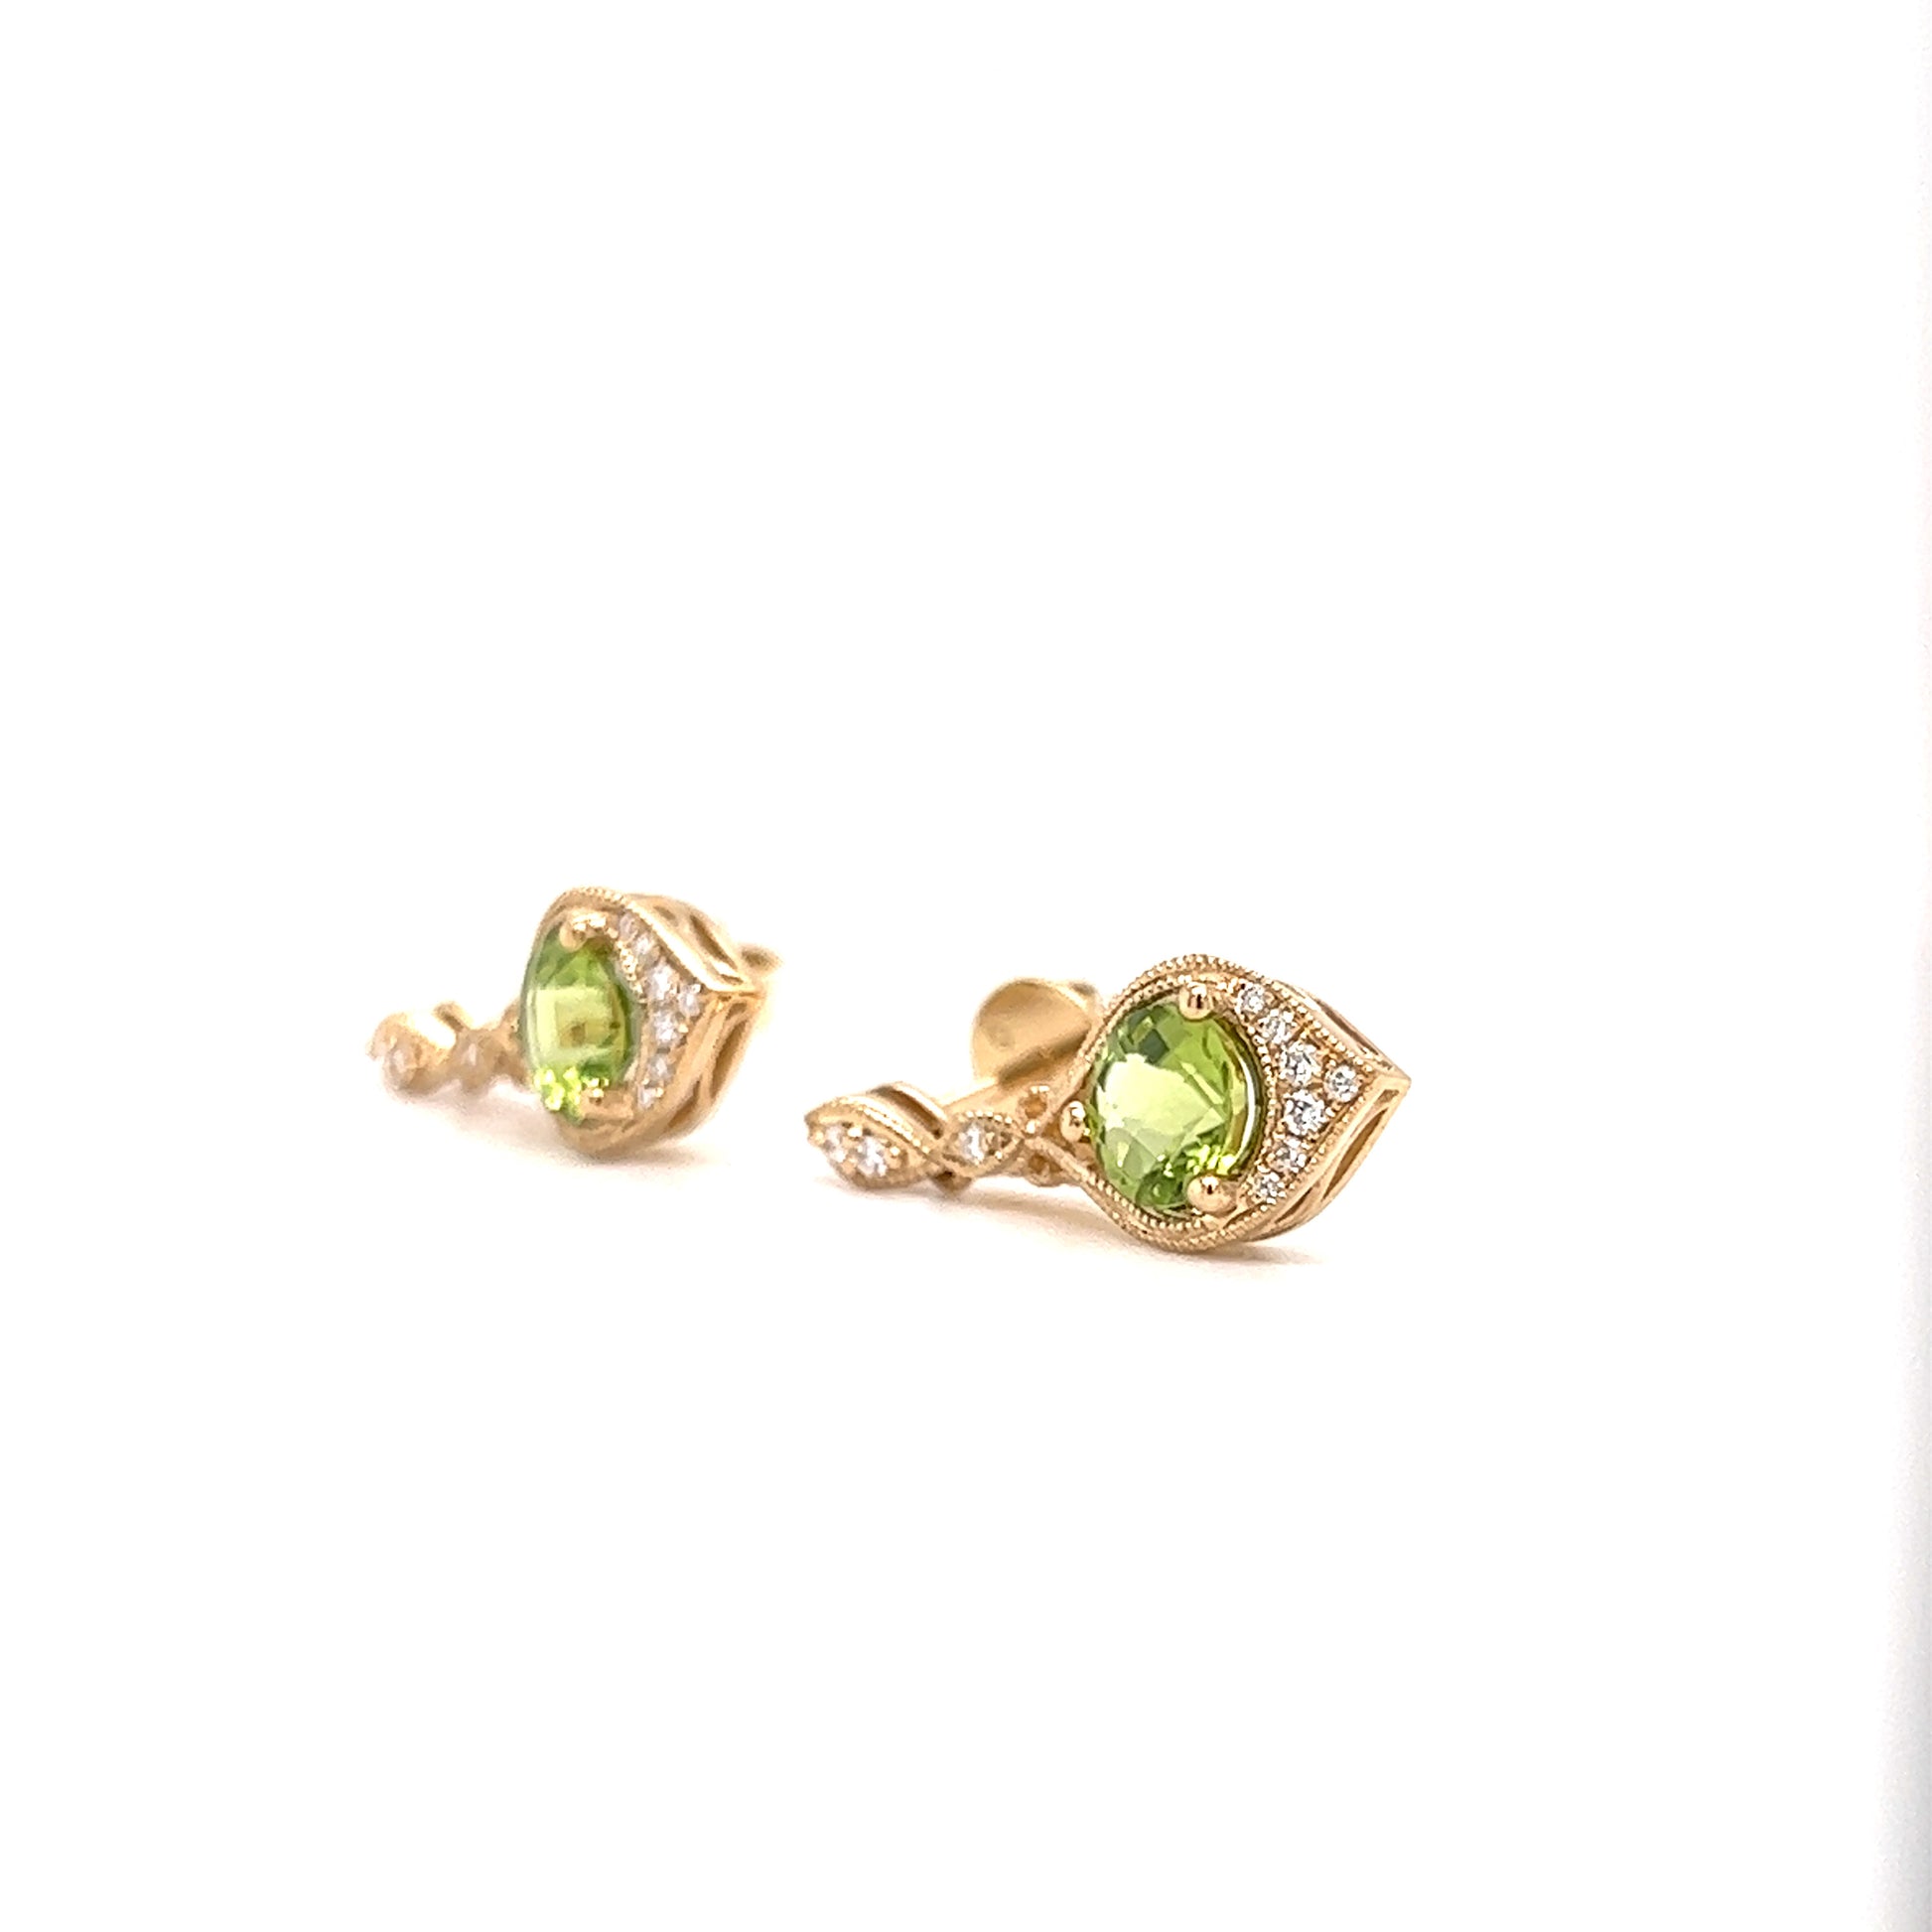 Round Peridot Drop Earrings with Twenty Diamonds in 14K Yellow Gold Right Side View